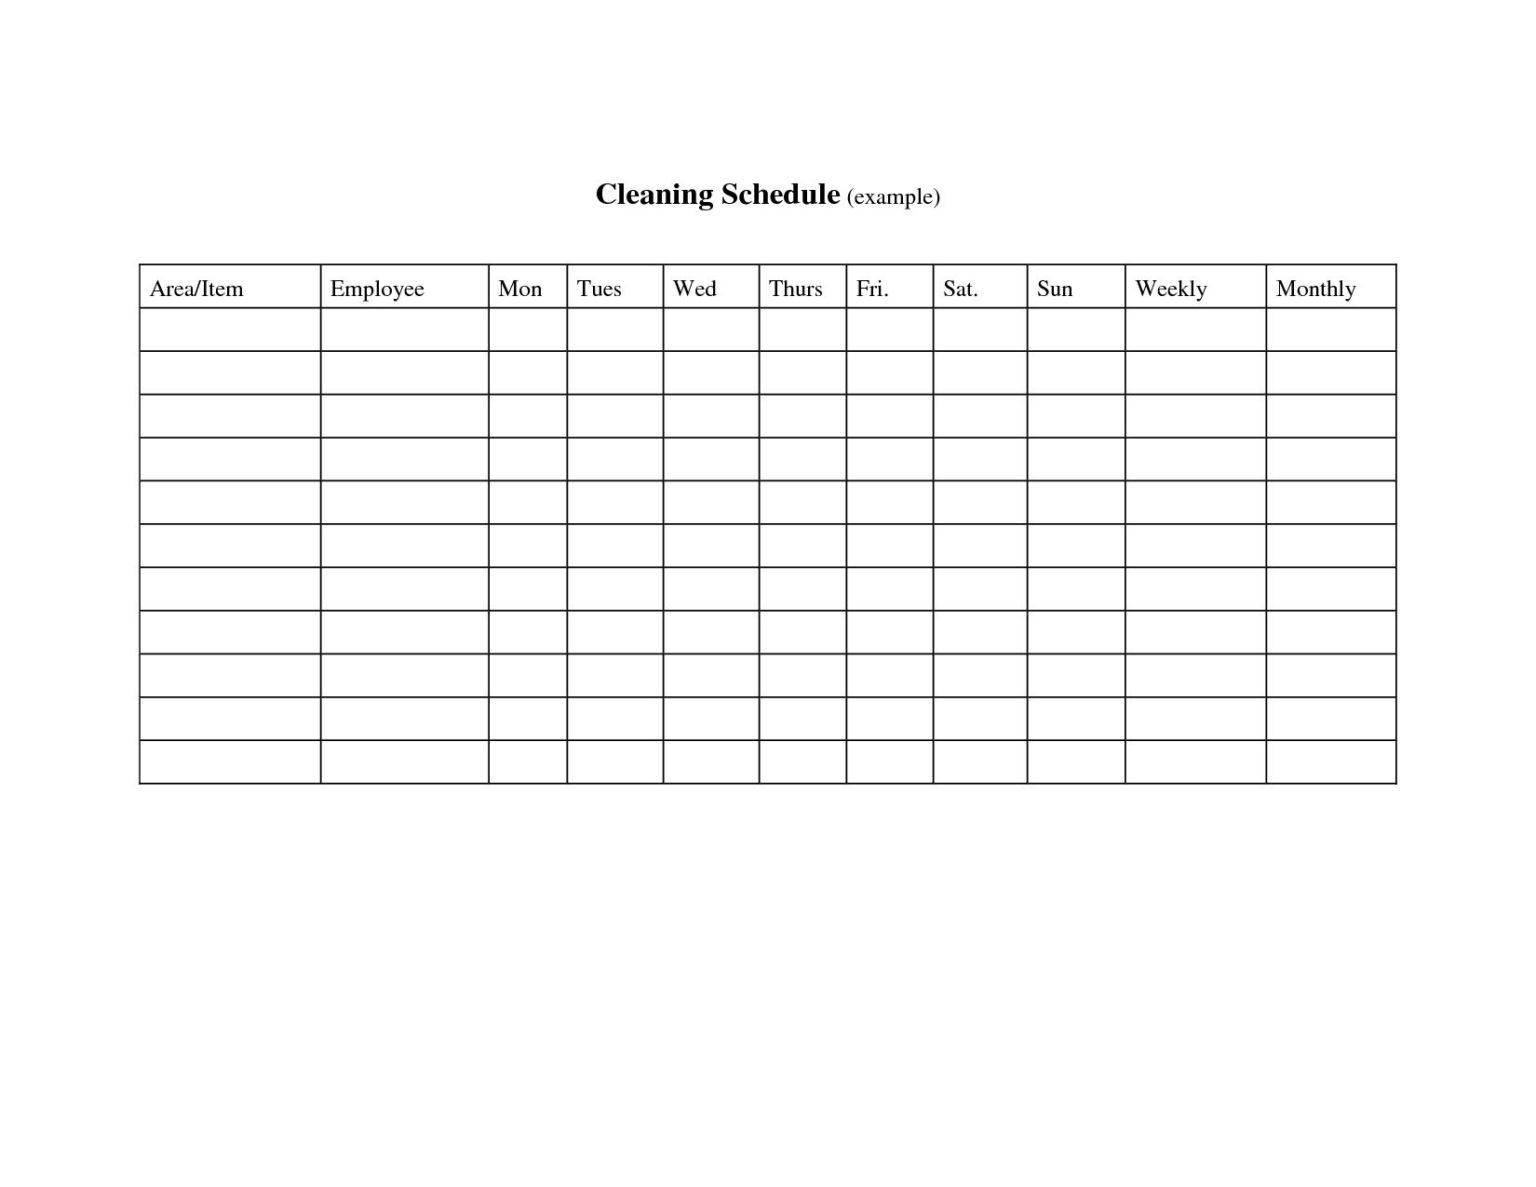 awesome-blank-cleaning-schedule-template-sparklingstemware